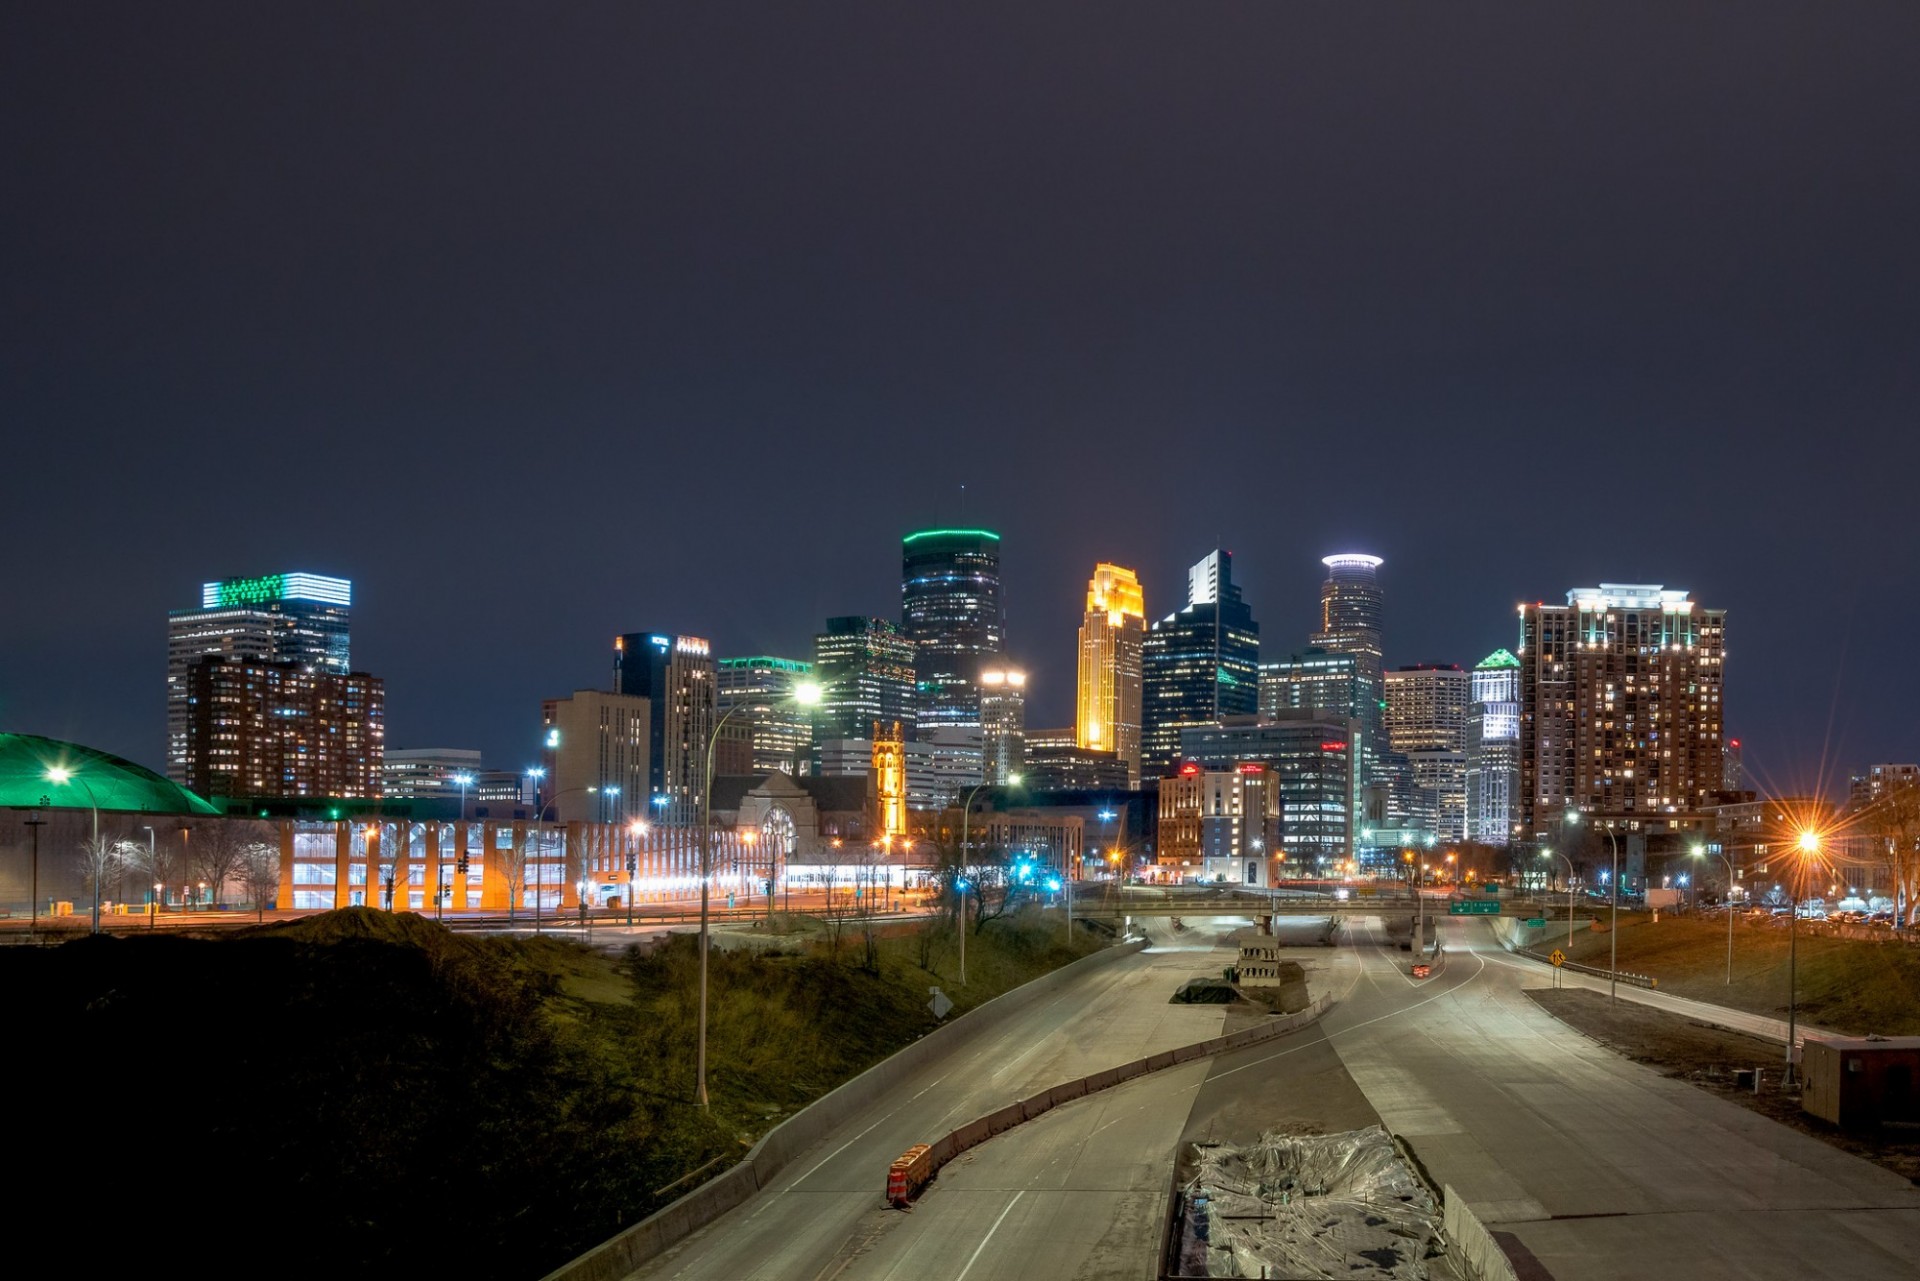 View of empty highways with the cityscape of Minneapolis in the background